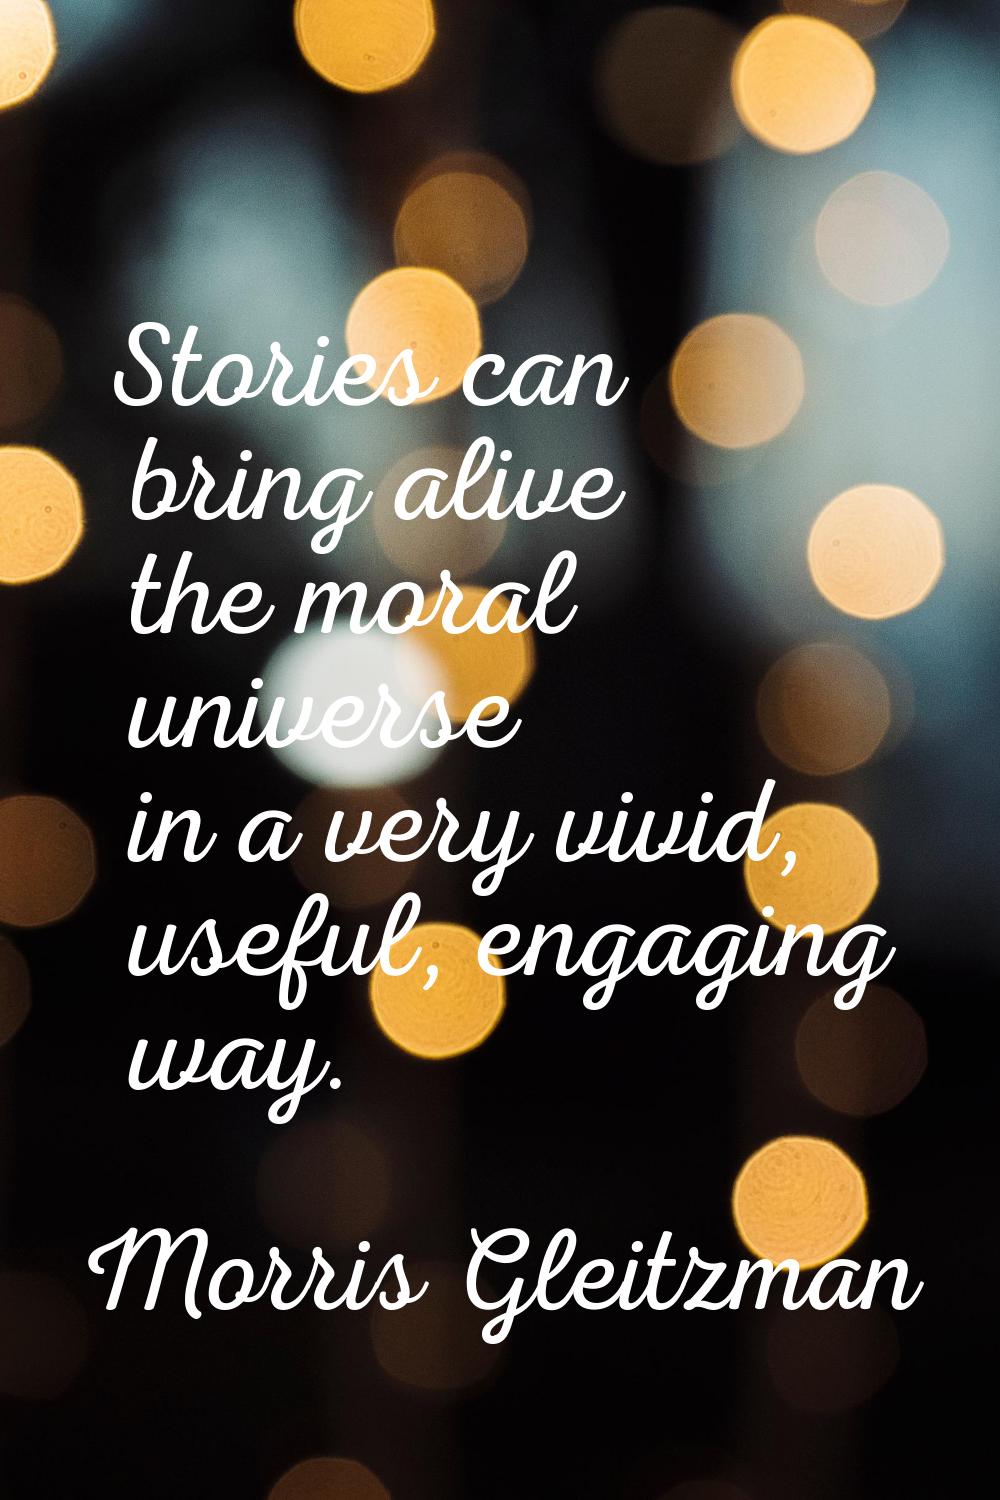 Stories can bring alive the moral universe in a very vivid, useful, engaging way.